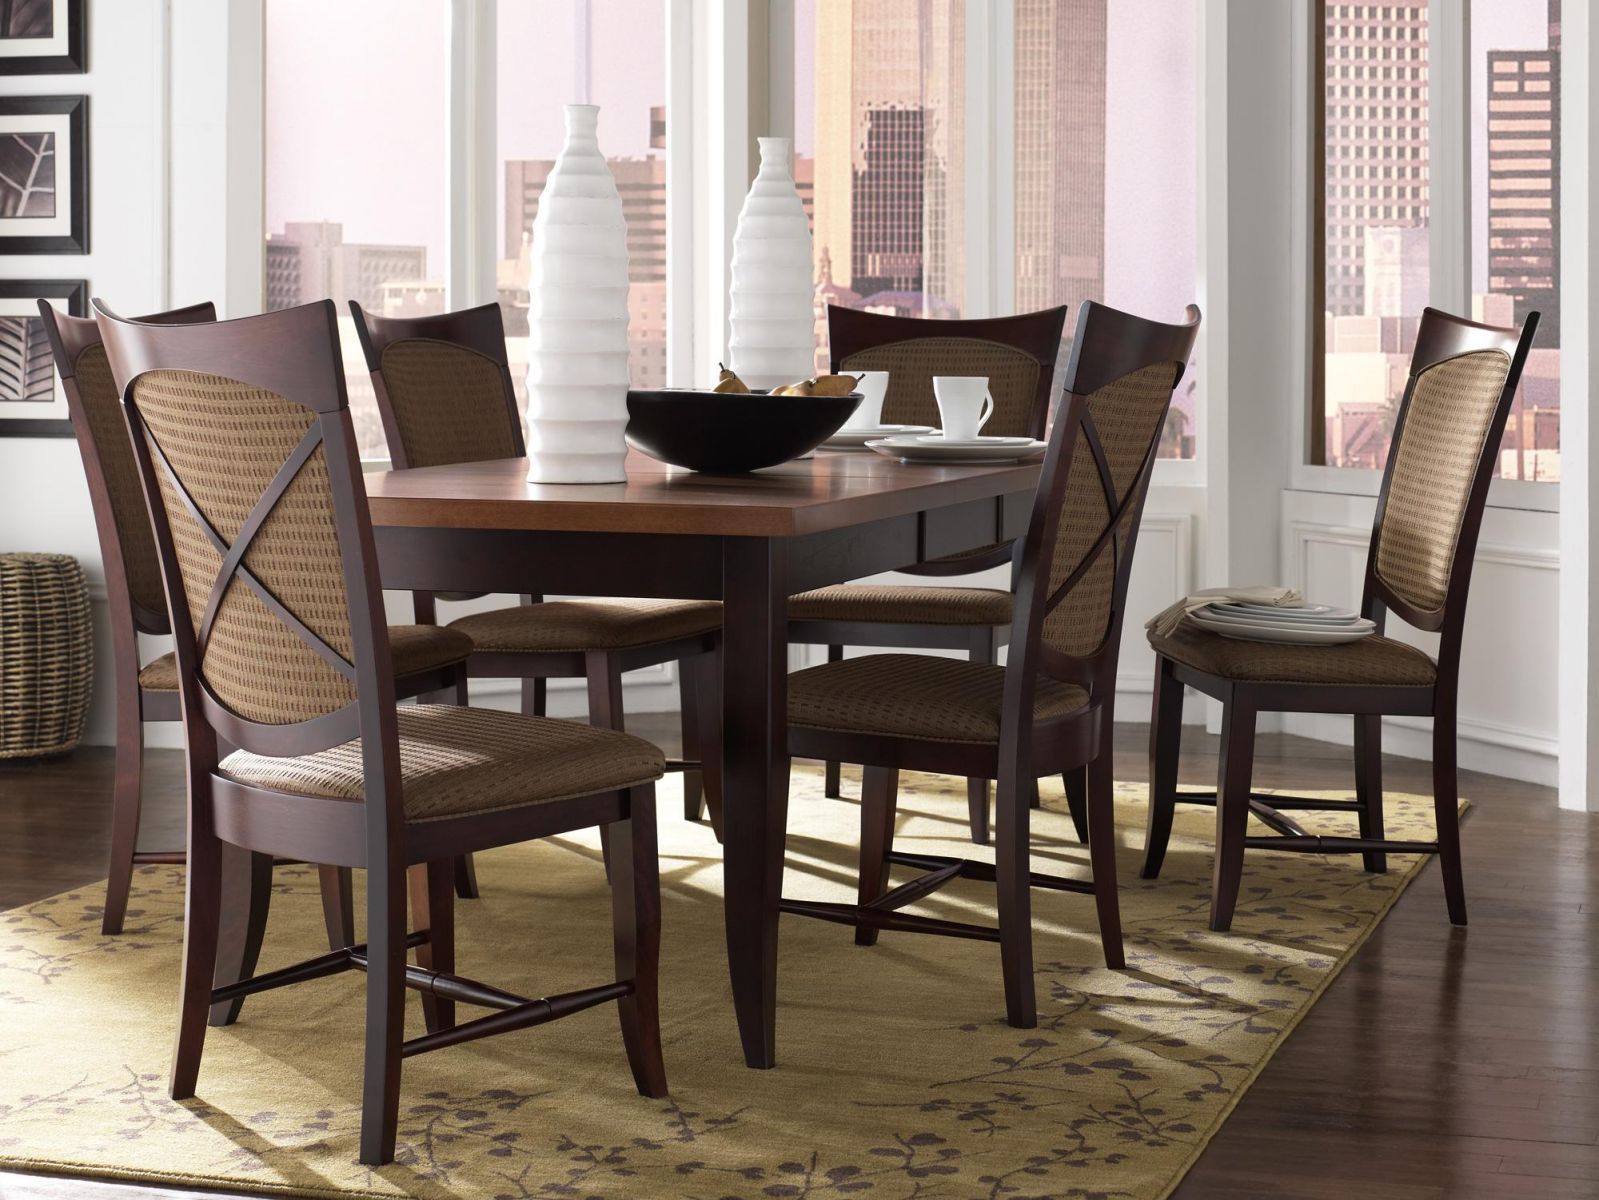 Canadel Dining Room SetCall (631) 742-1351 for Best Price Guarantee  Long Island FurnitureDinette Sets New York , Dinette Sets Long Island , Dining Room Sets New York , Dining Room Sets Long Island, Dining Room Chairs Long Island